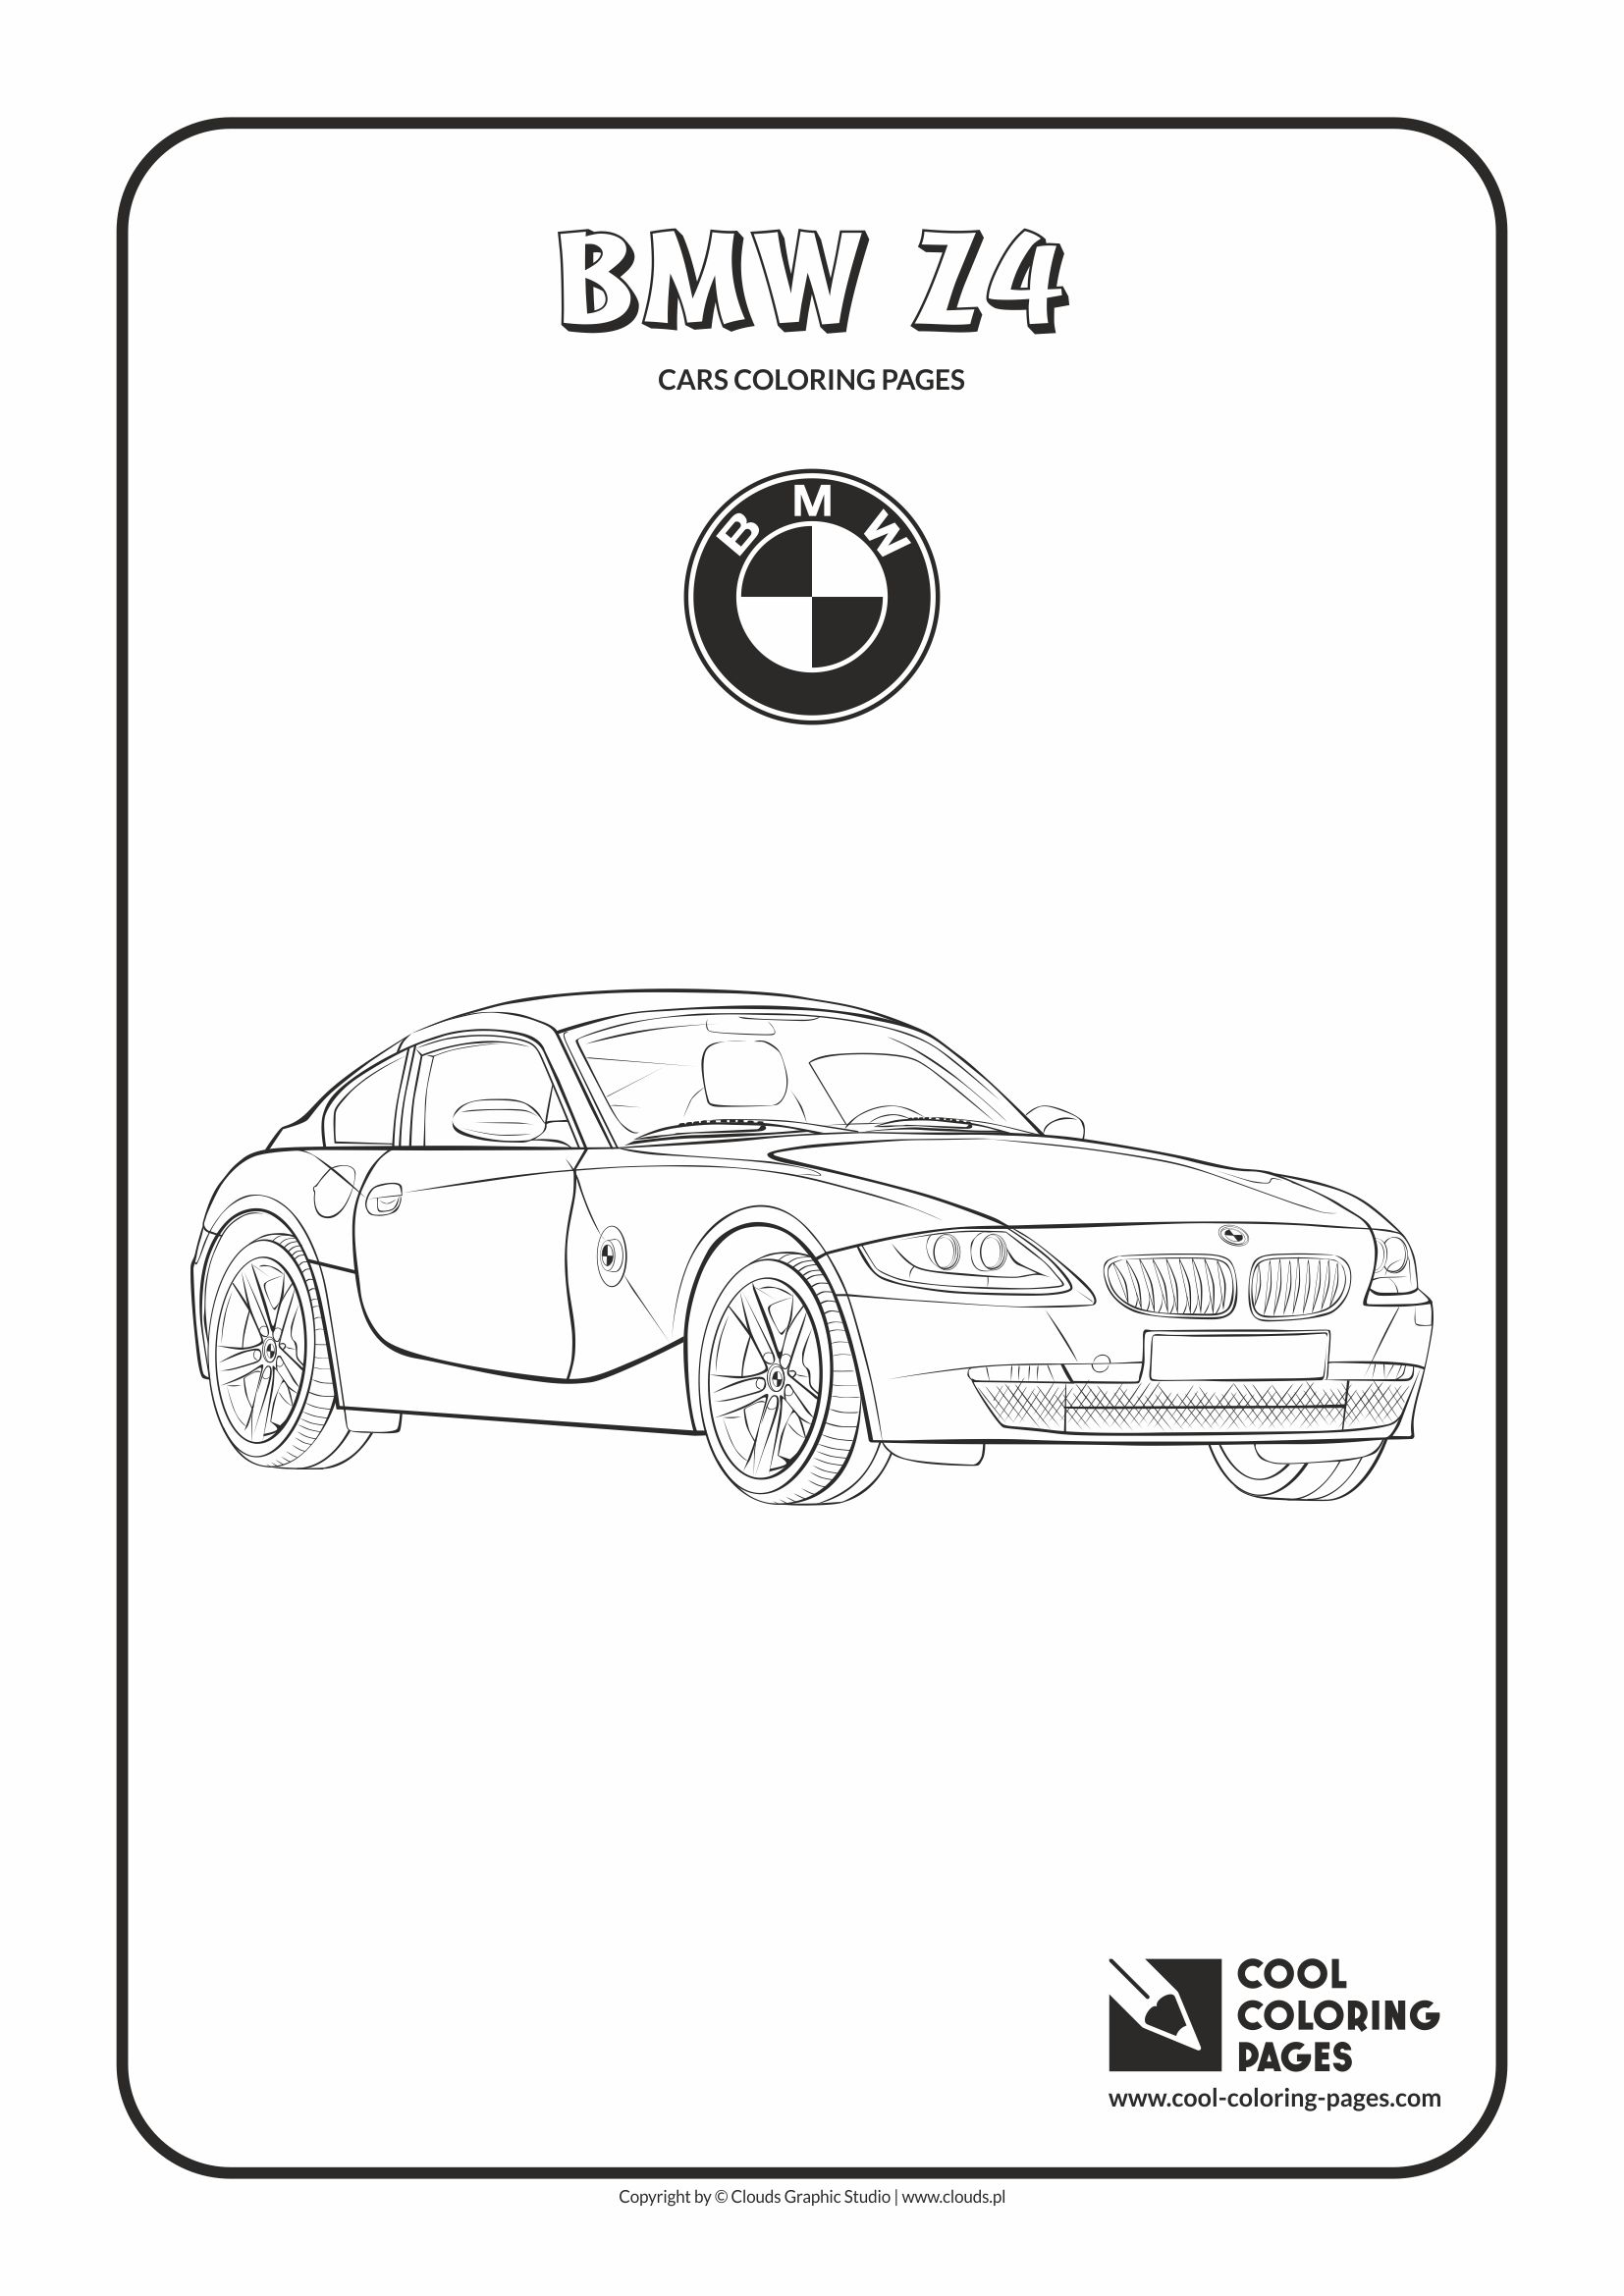 Cars Coloring Pages Cool Vehicles Bmw Z4 Page